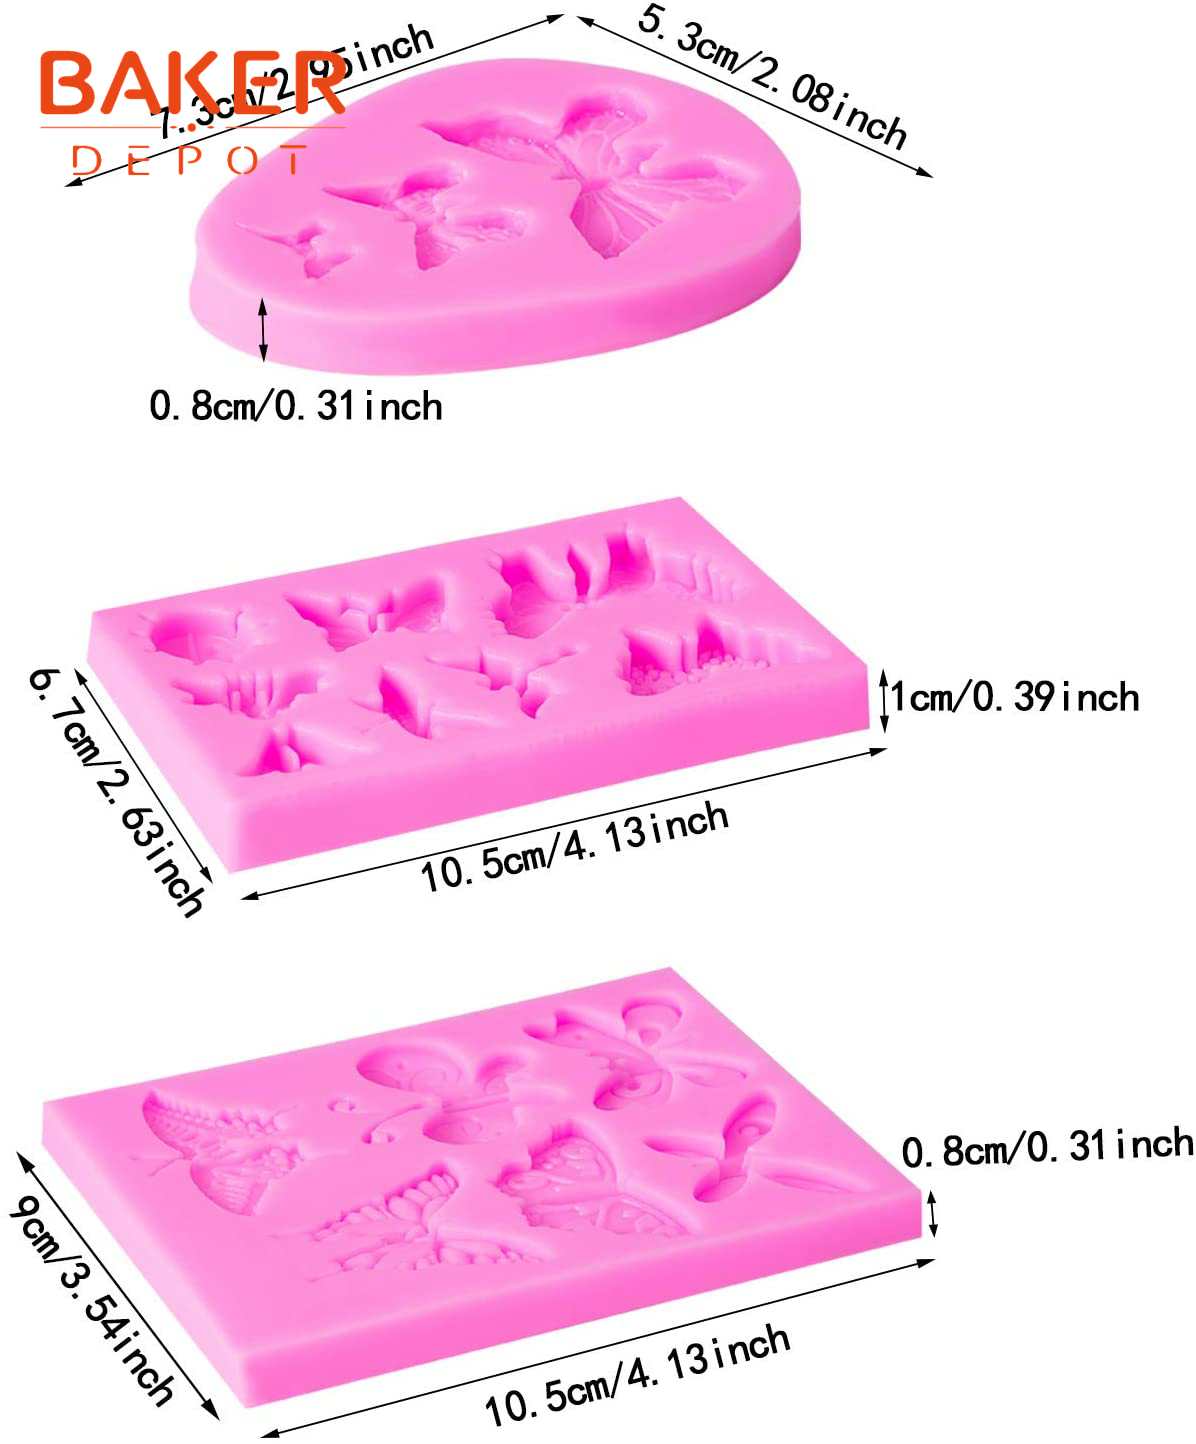 http://images.51microshop.com/1044/product/20200620/3_Pieces_Butterfly_Silicone_Mold_Gummy_Candy_Cake_Fondant_Mold_Pink_Chocolate_Mold_Non_stick_DIY_Tool_for_Cake_Decorating_Polymer_Clay_1592628173198_0.jpg